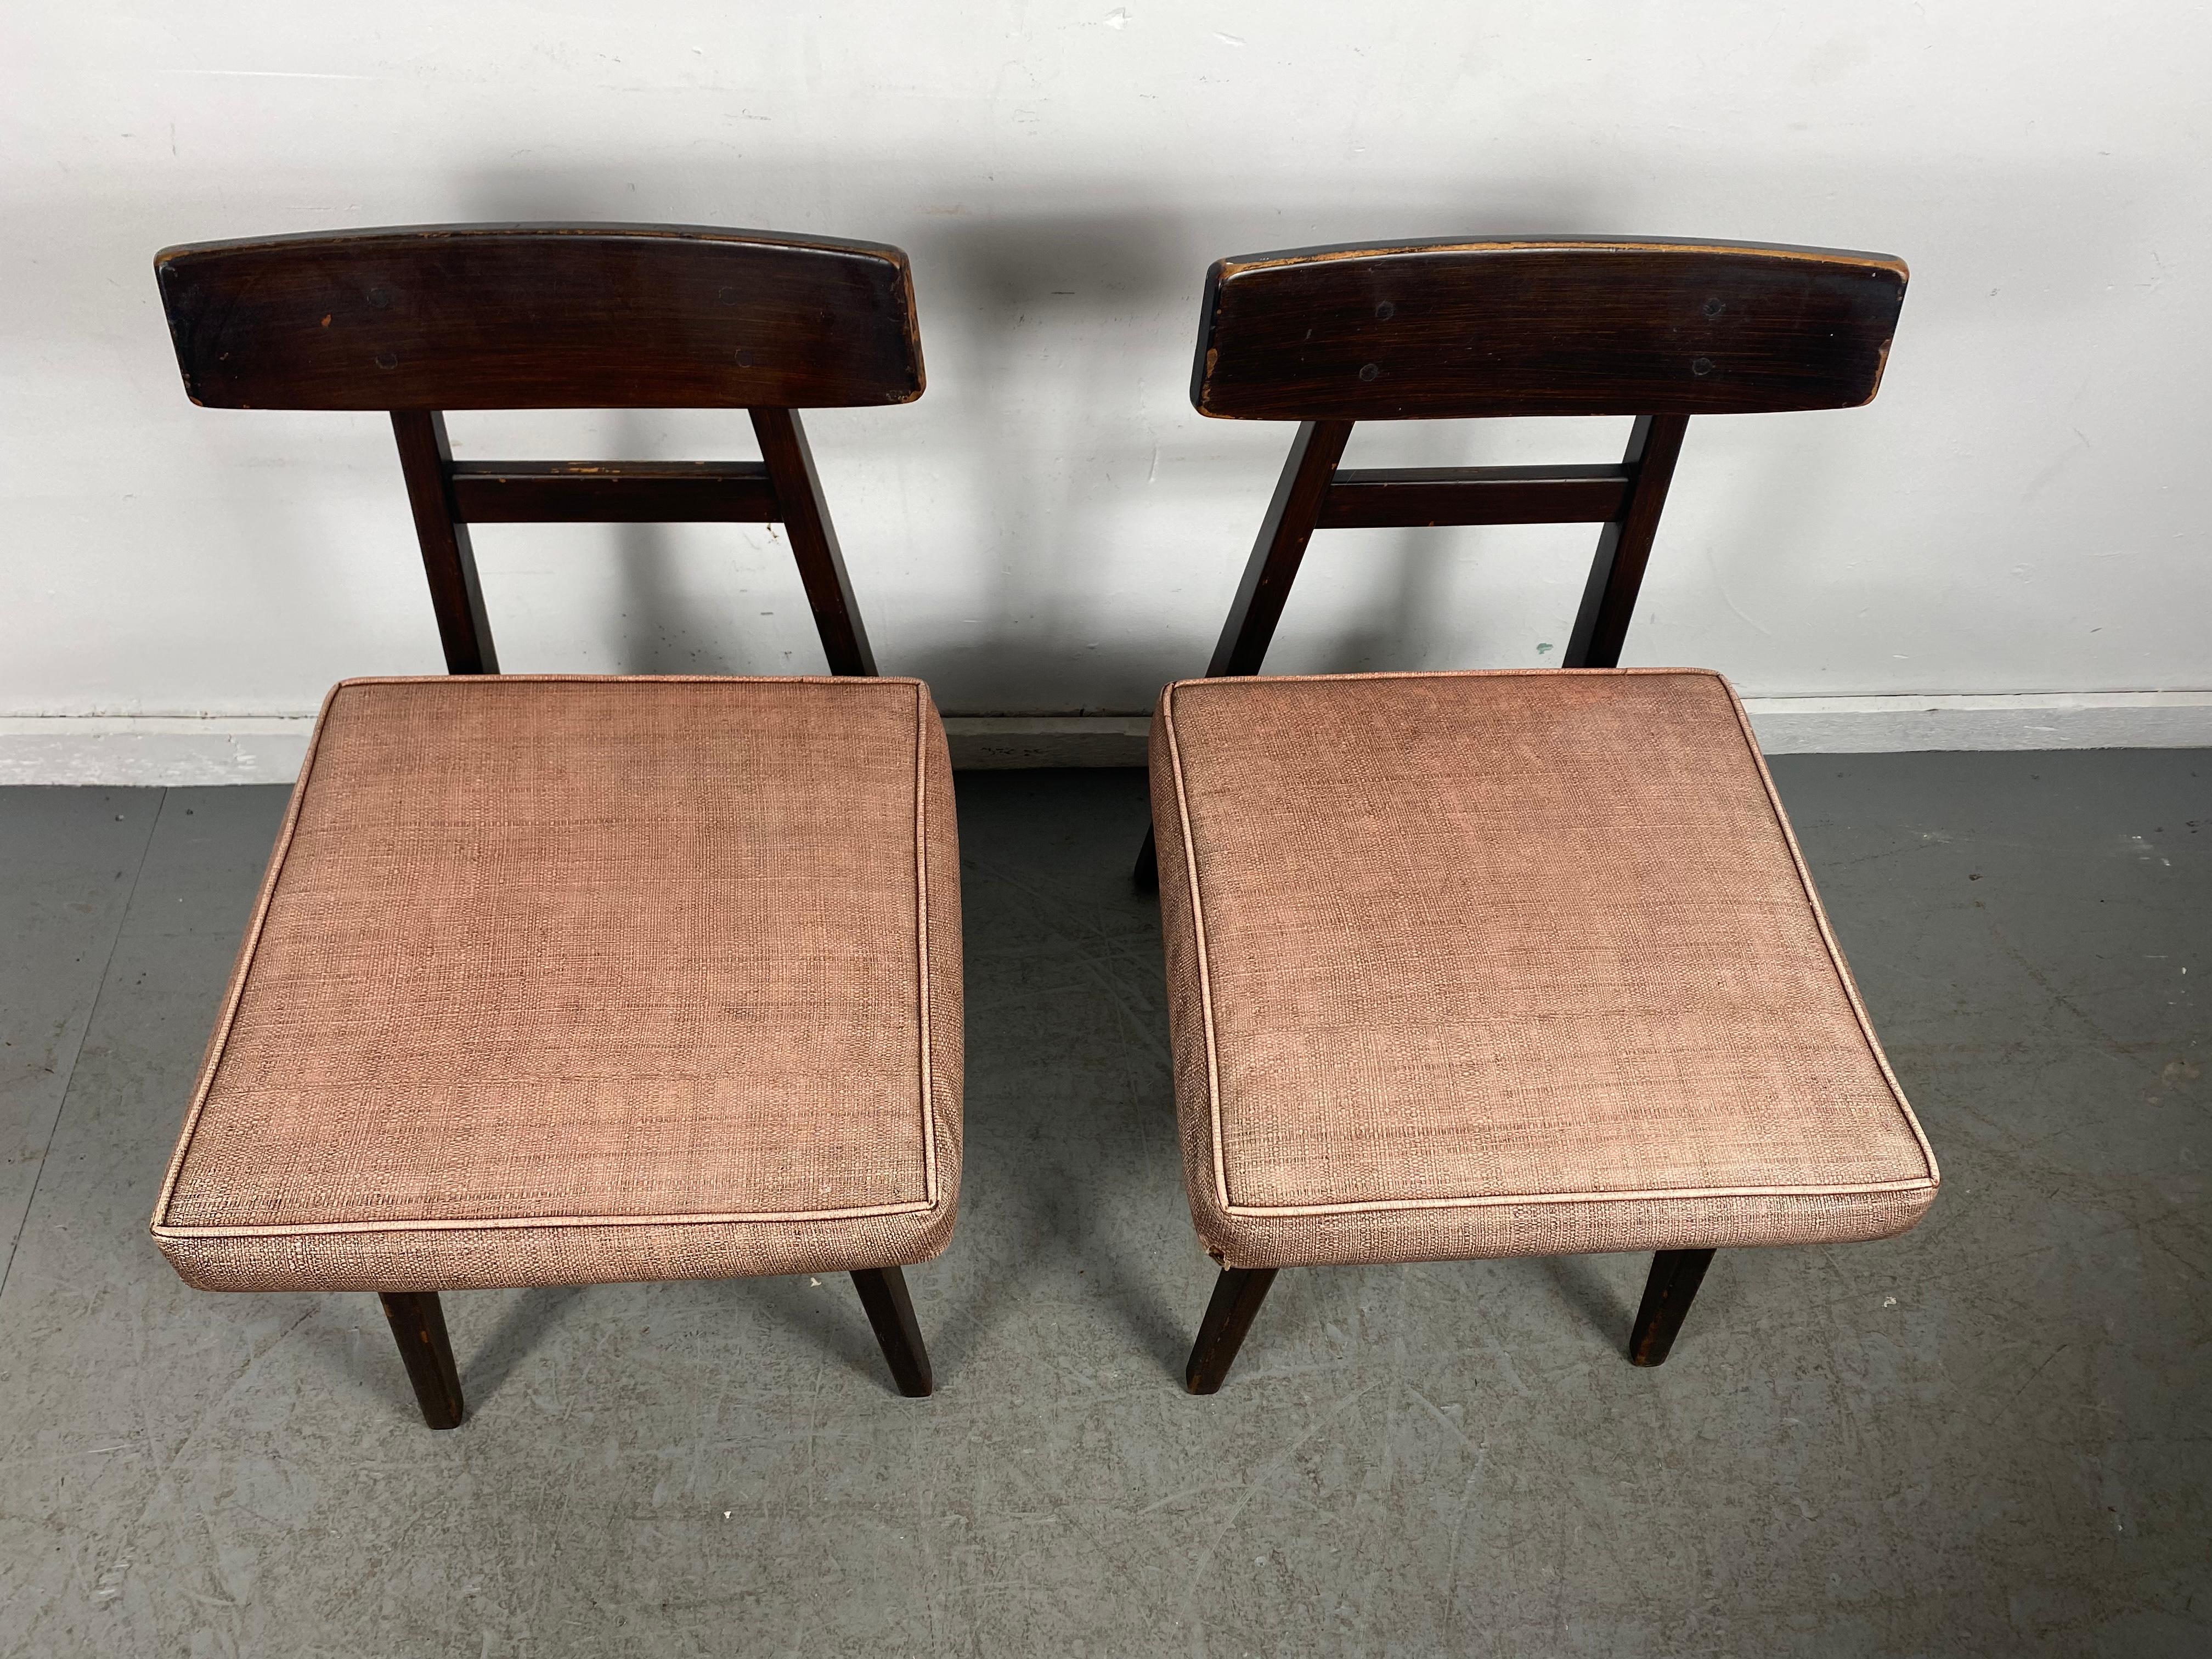 Extremely Rare Asian Inspired Modernist Side Chairs Designed by Jens Risom For Sale 4